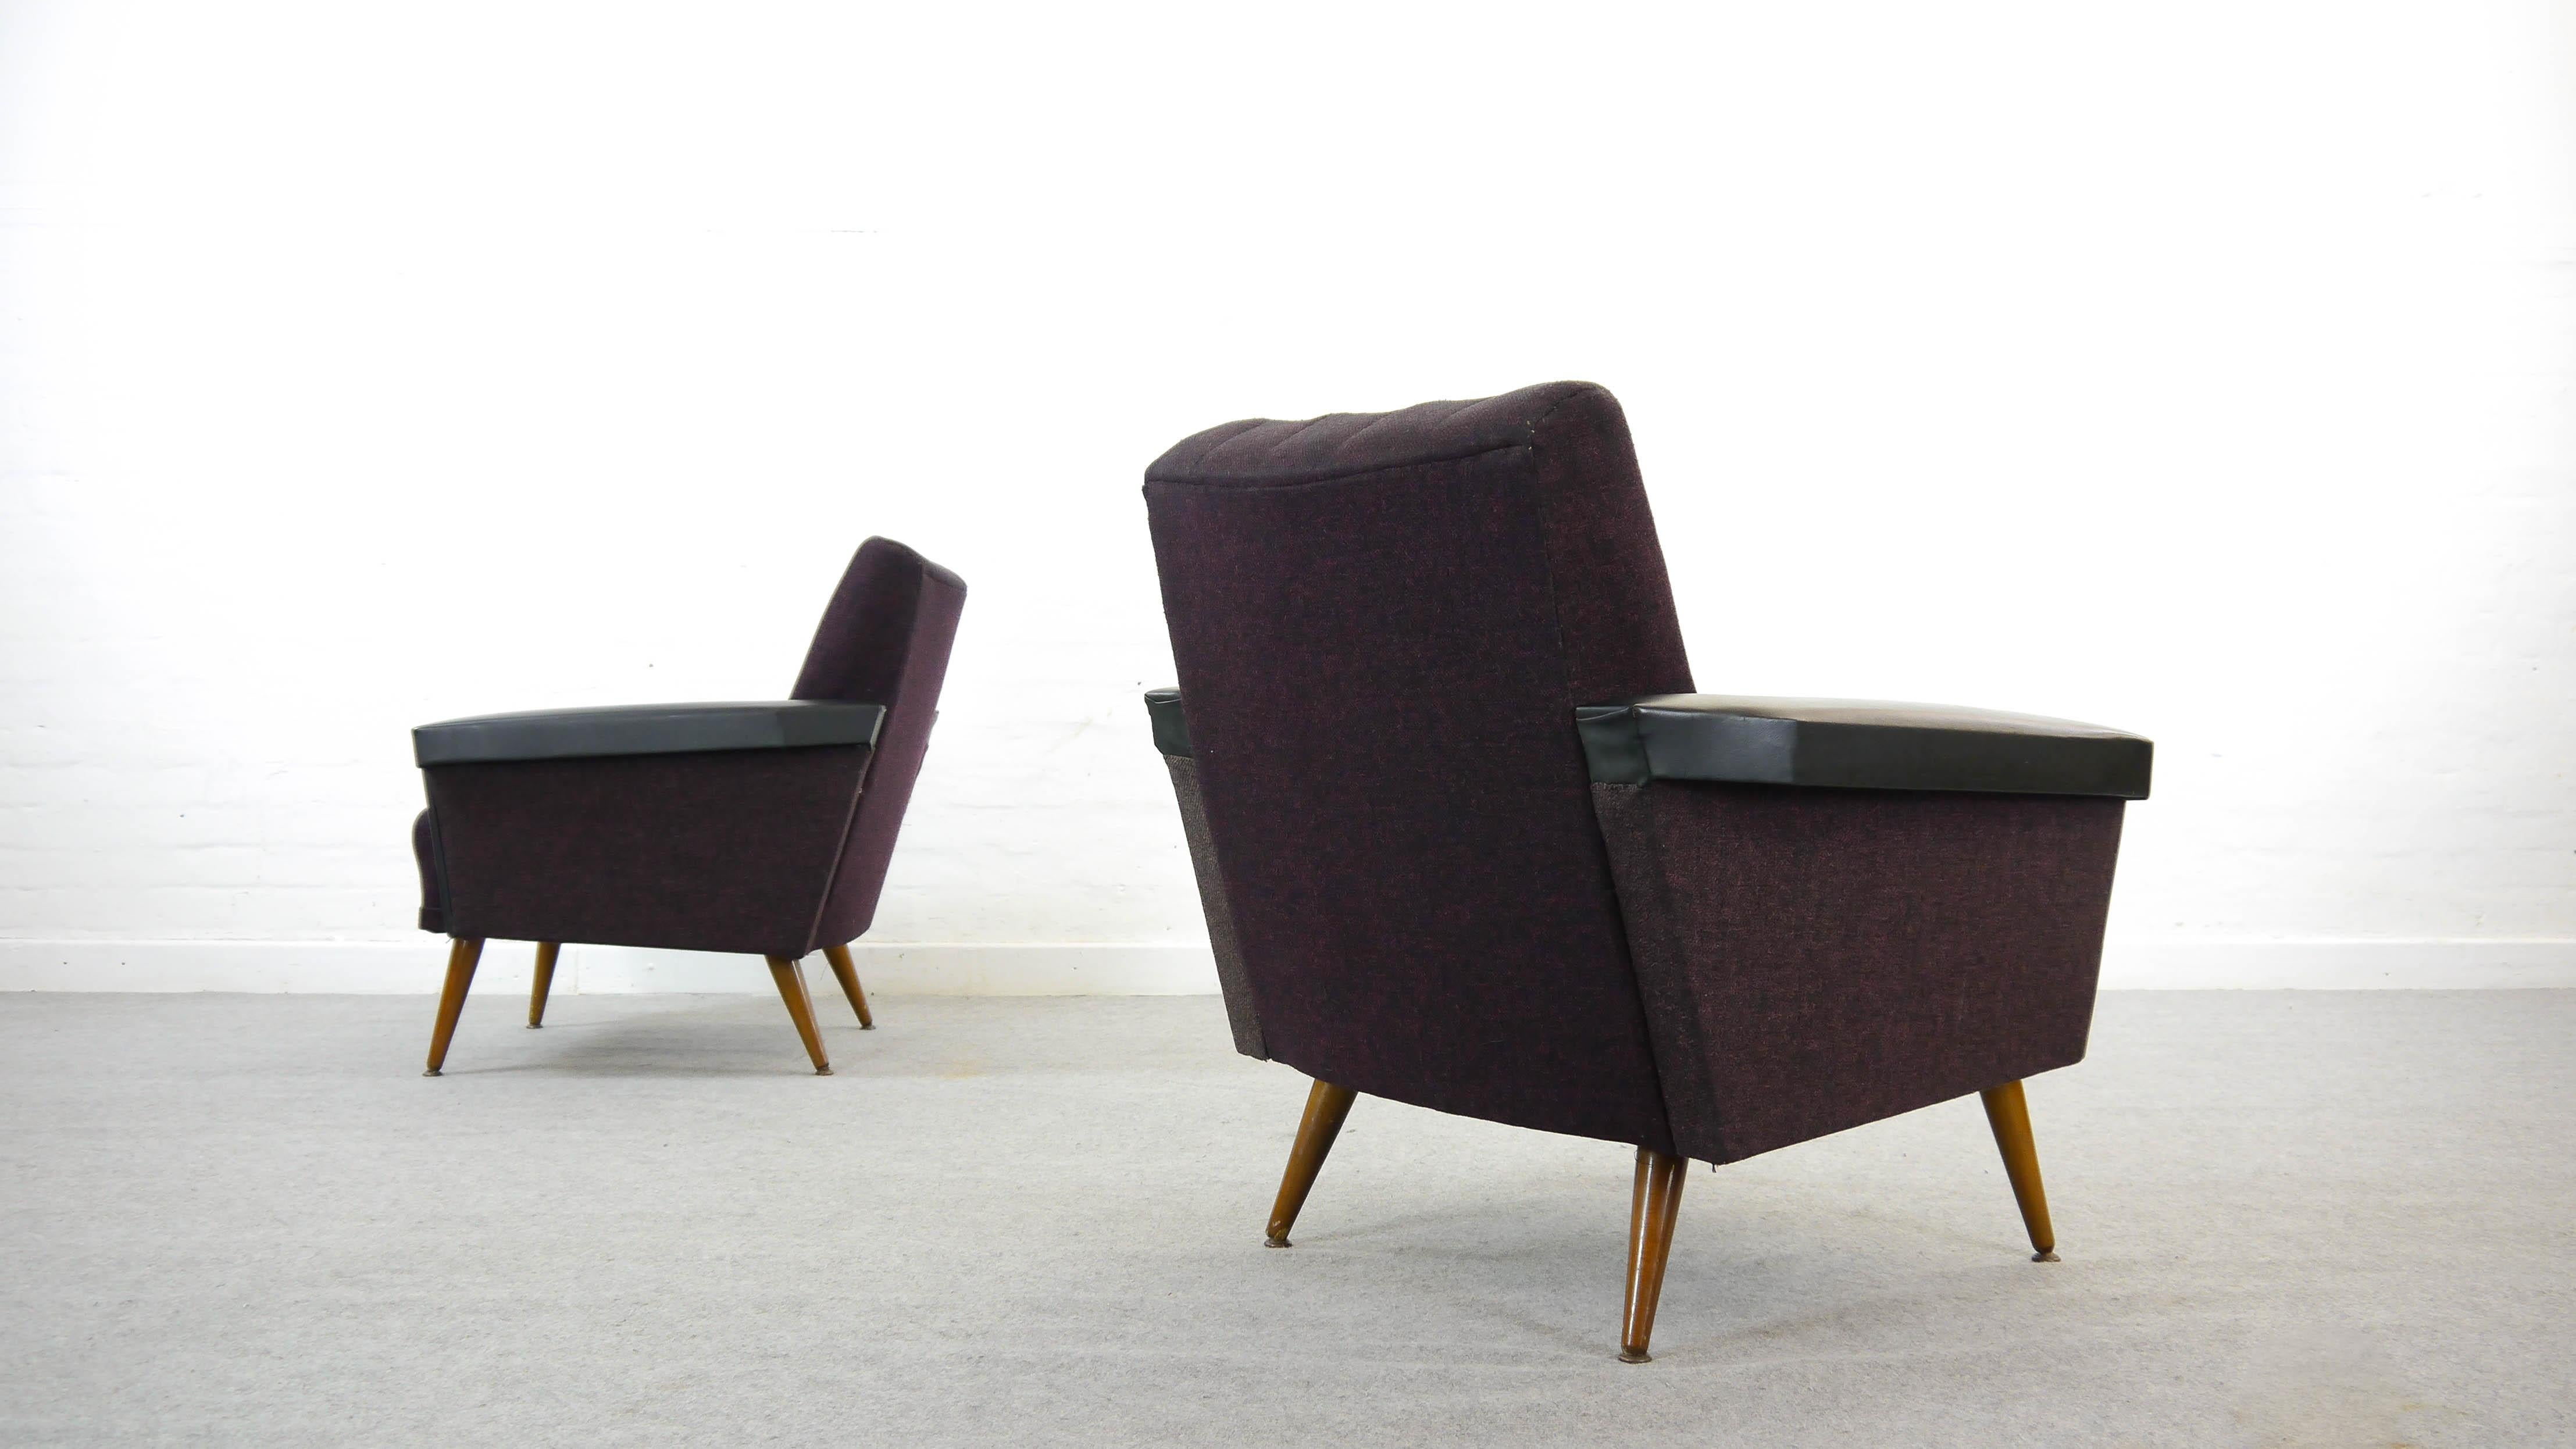 Vintage Pair of Midcentury Cocktail Chairs or Club Chairs in Purple-Black, 1950s In Fair Condition For Sale In Halle, DE